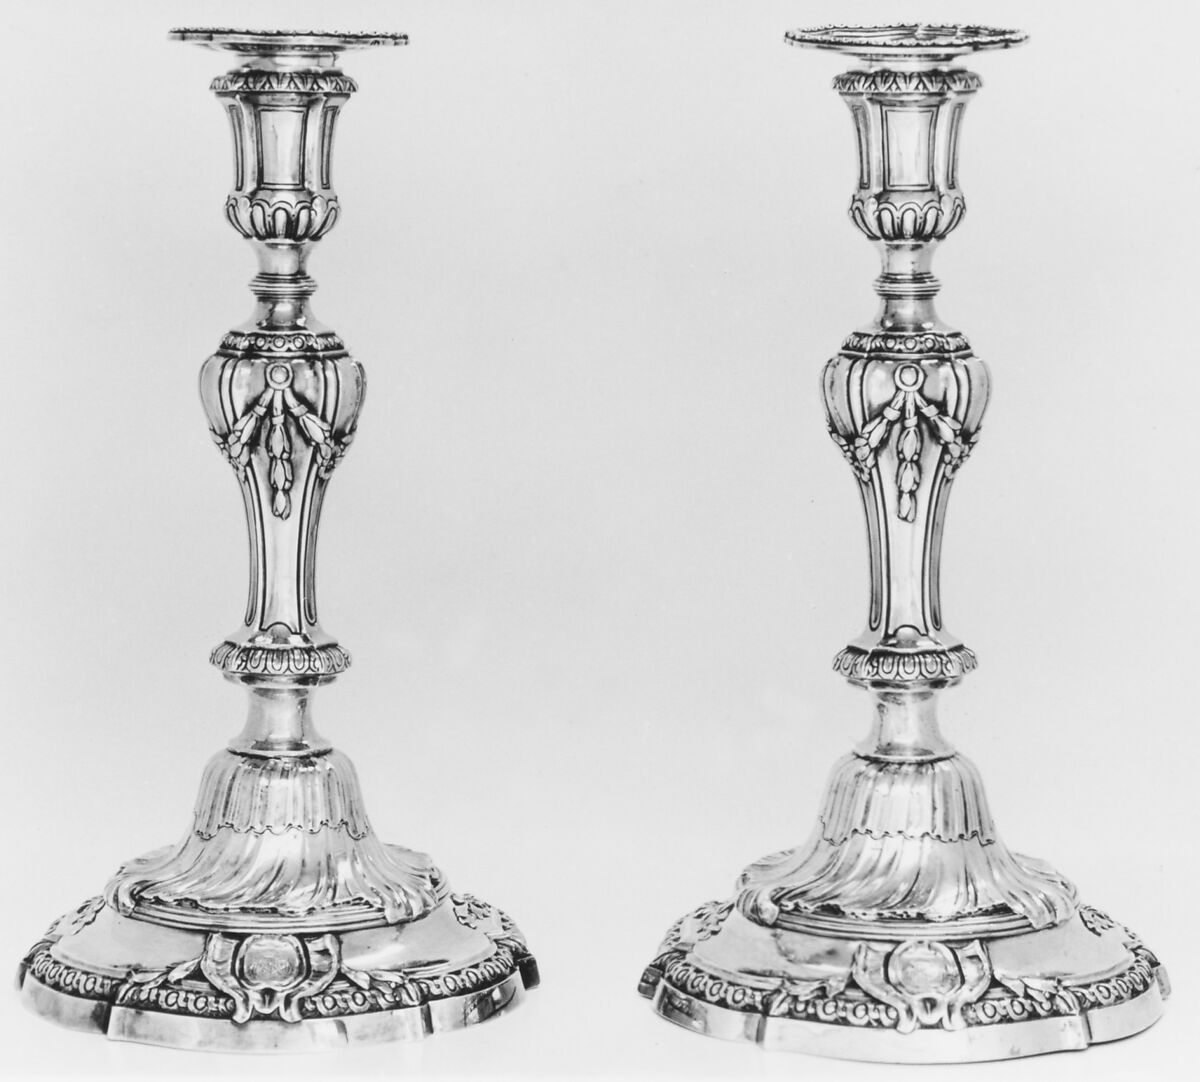 Pair of candlesticks, Jean-Baptiste-François Chéret (1728, master 1759, recorded up to 1791), Silver, French, Paris 